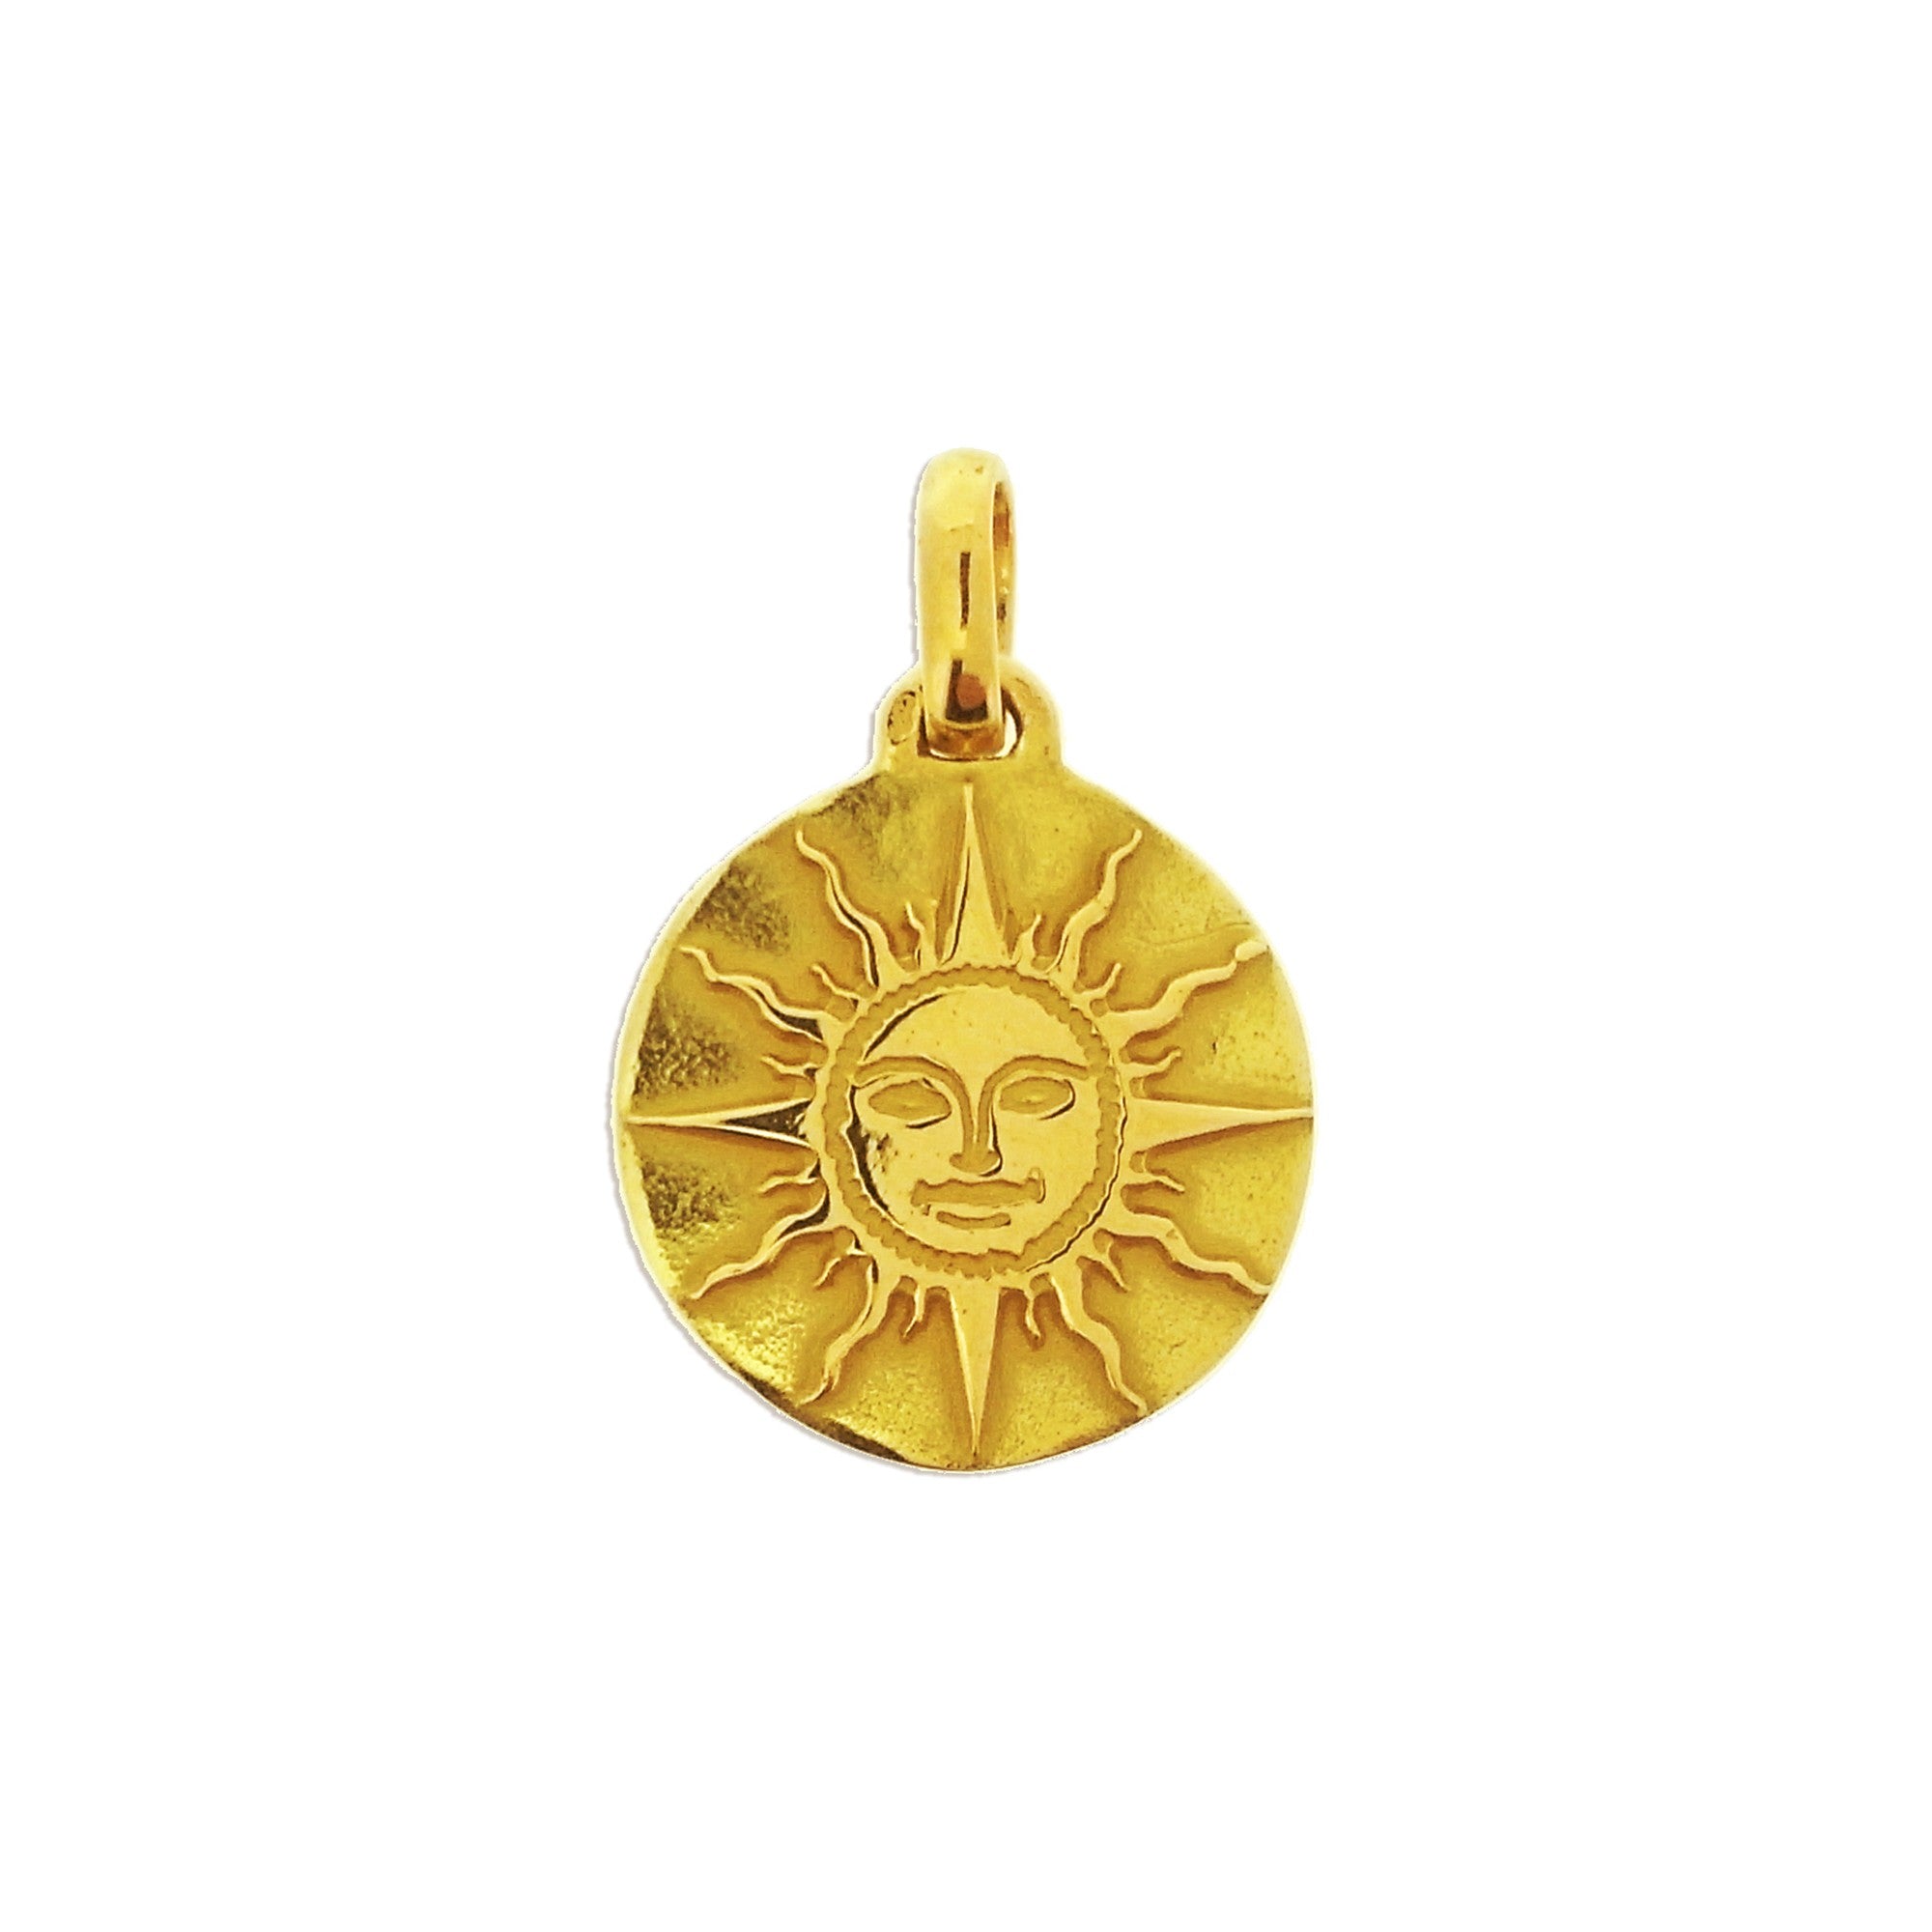 Secular medal Tournaire Soleil in gold - Philippe Tournaire